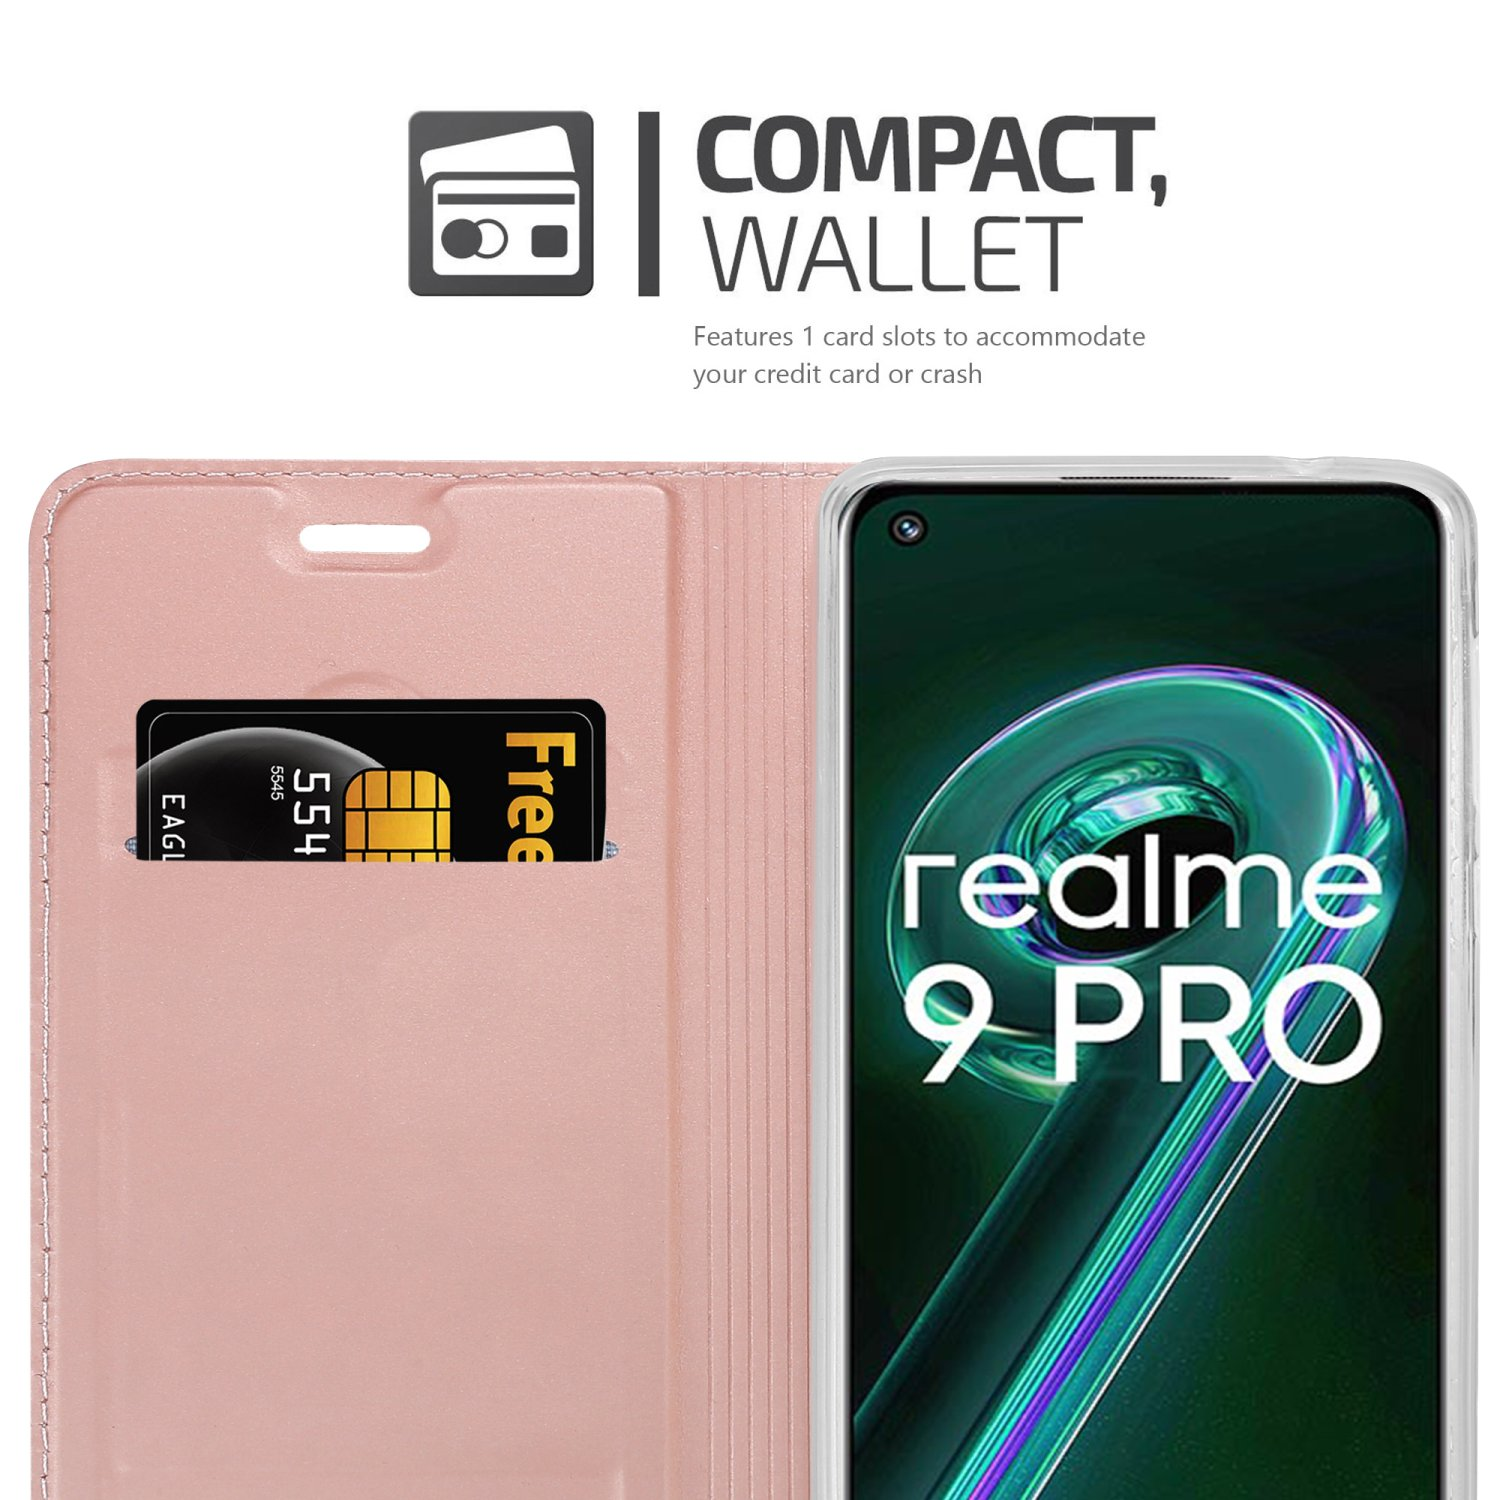 Classy / / Bookcover, 9 CE 5G, Handyhülle V25 Nord GOLD Q5 / Style, Realme, Book 2 PRO 9 CLASSY OnePlus ROSÉ LITE CADORABO / 5G